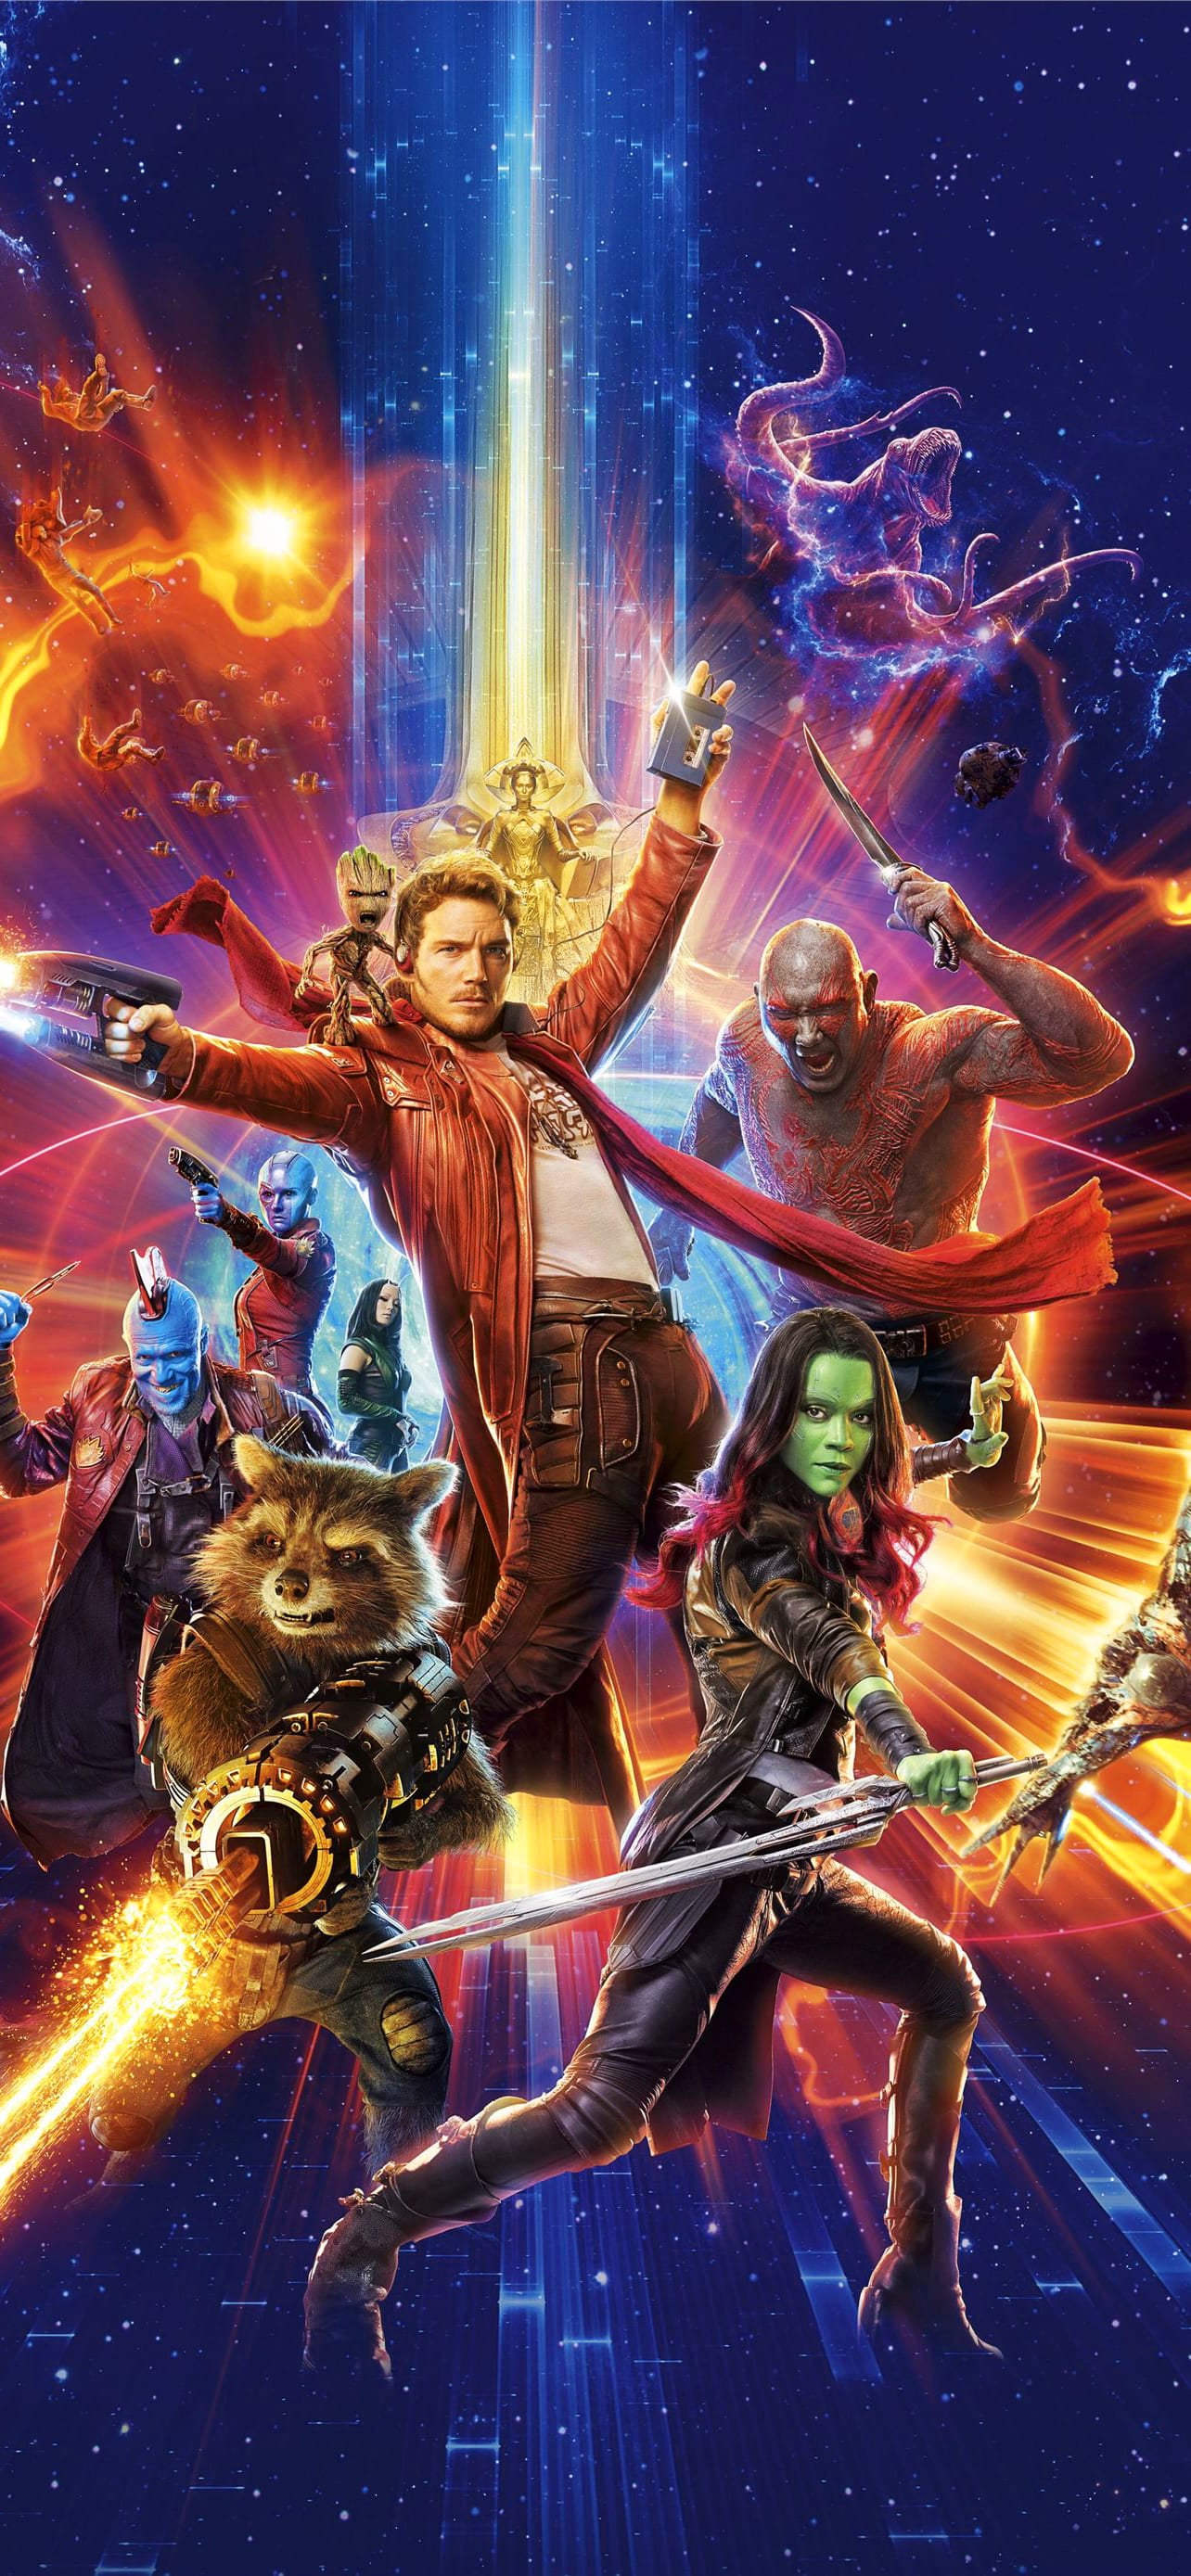 Guardians Of The Galaxy 3 Wallpapers